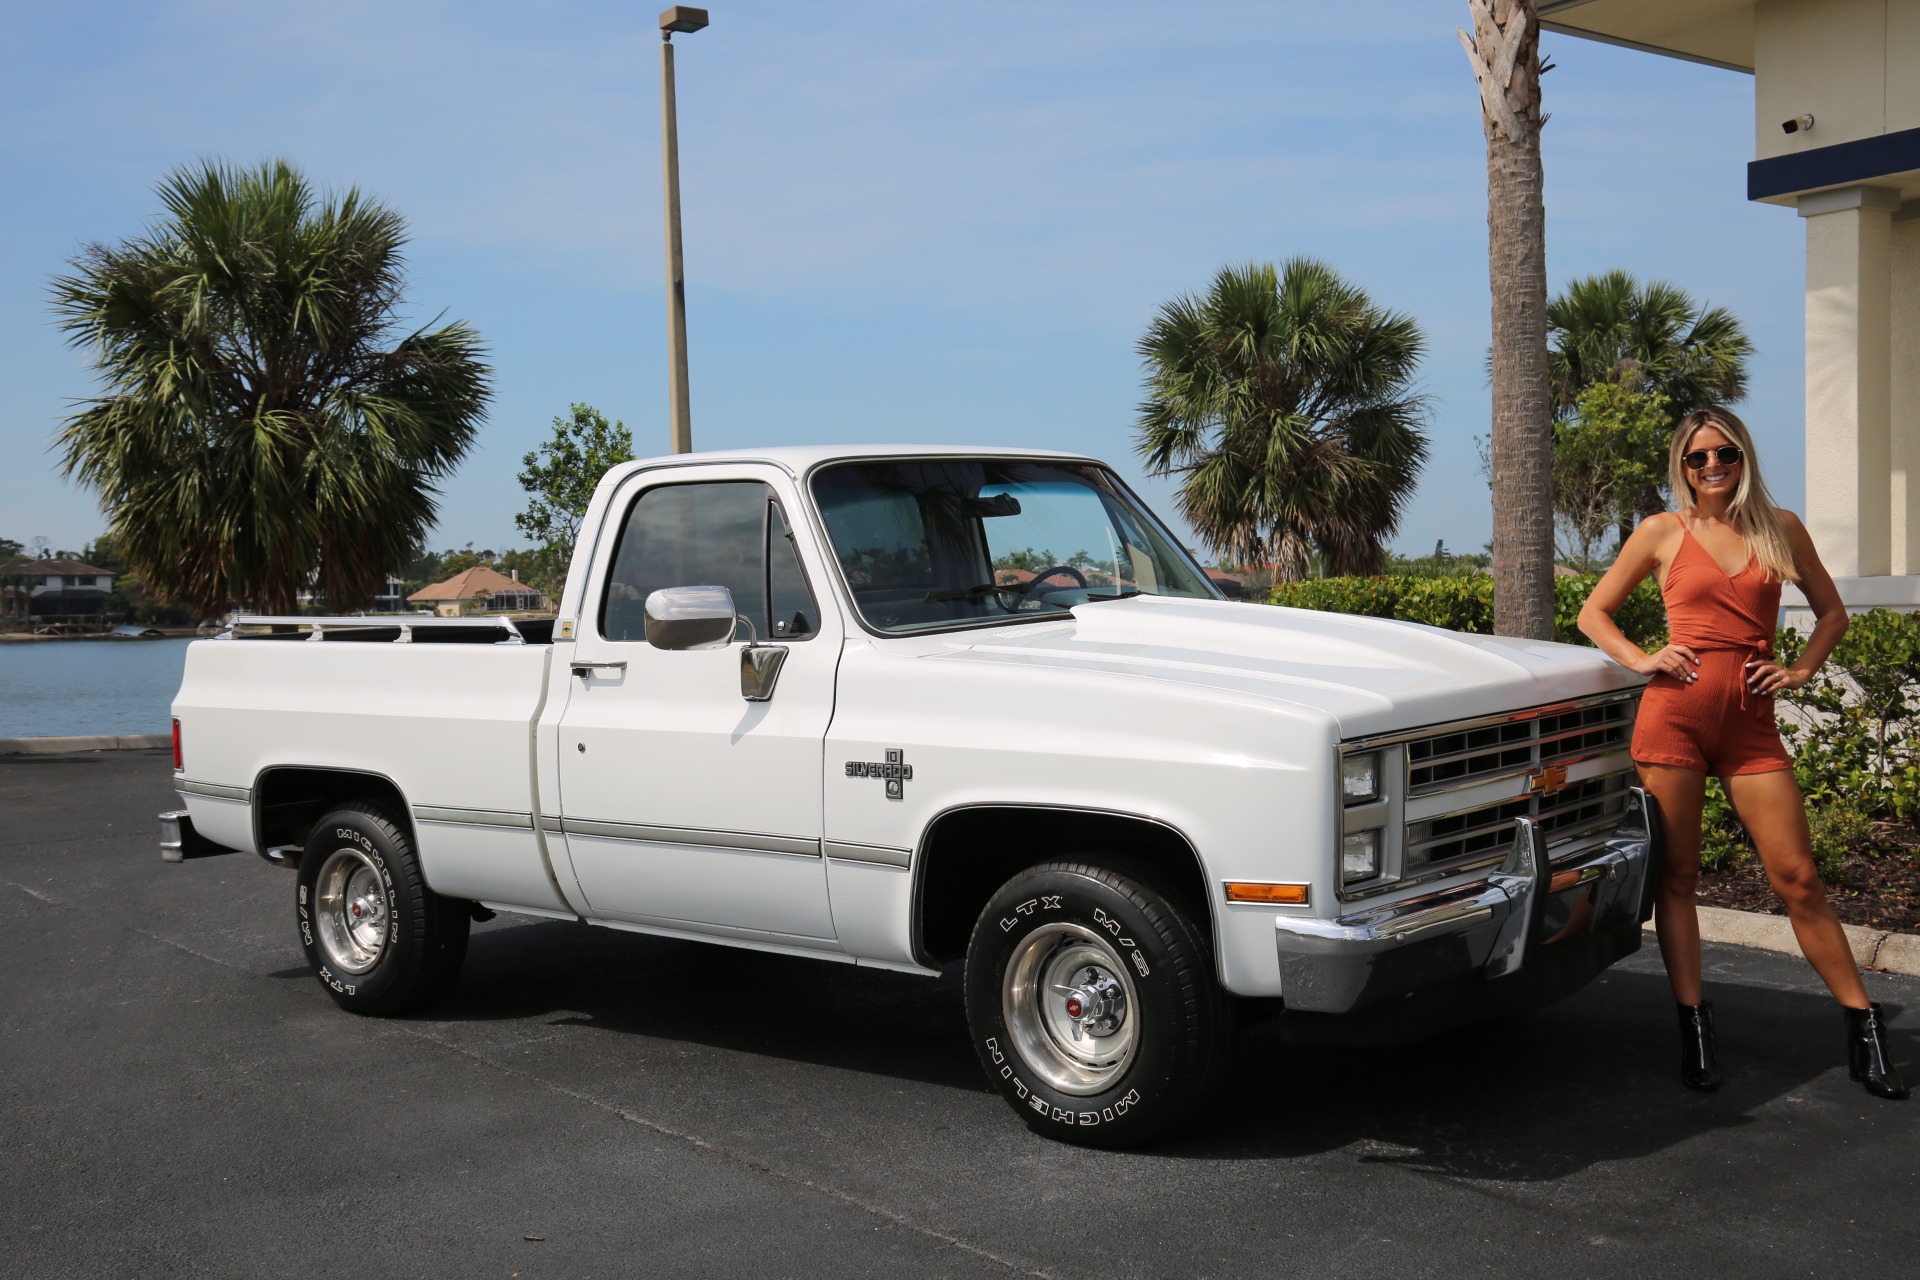 Used 1984 Chevrolet C/K 10 Series C10 Silverado for sale Sold at Muscle Cars for Sale Inc. in Fort Myers FL 33912 2